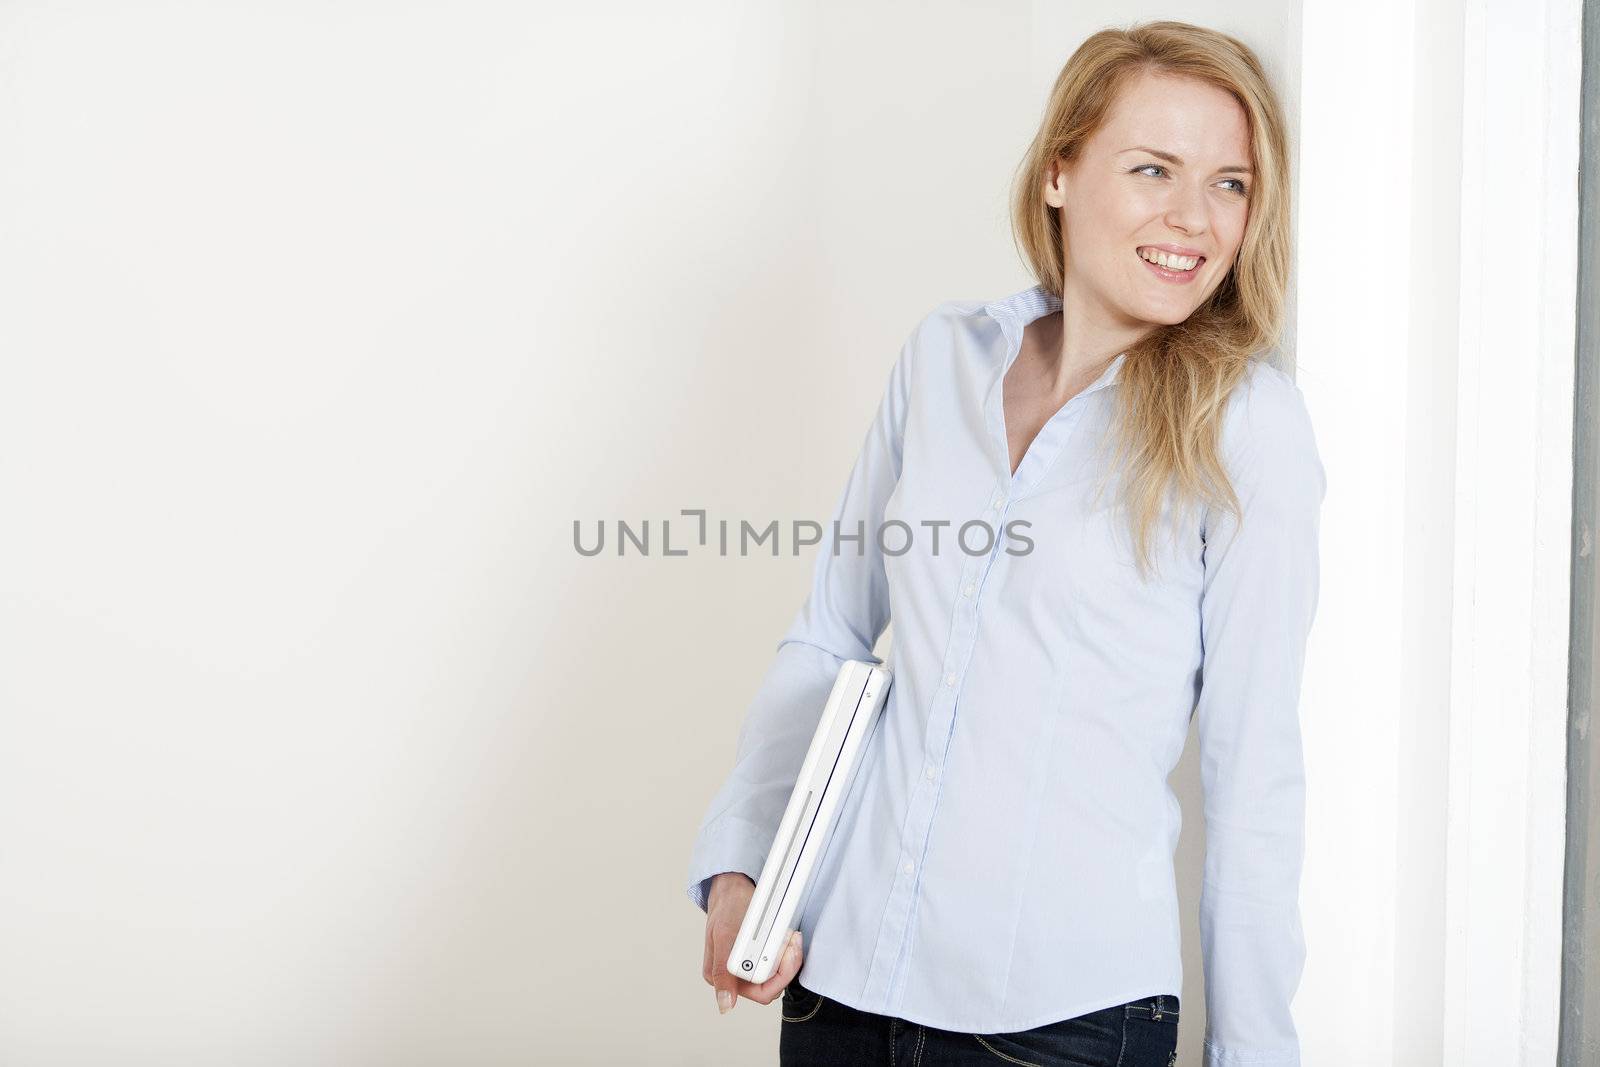 Young woman leaning against a white wall holding a white laptop computer